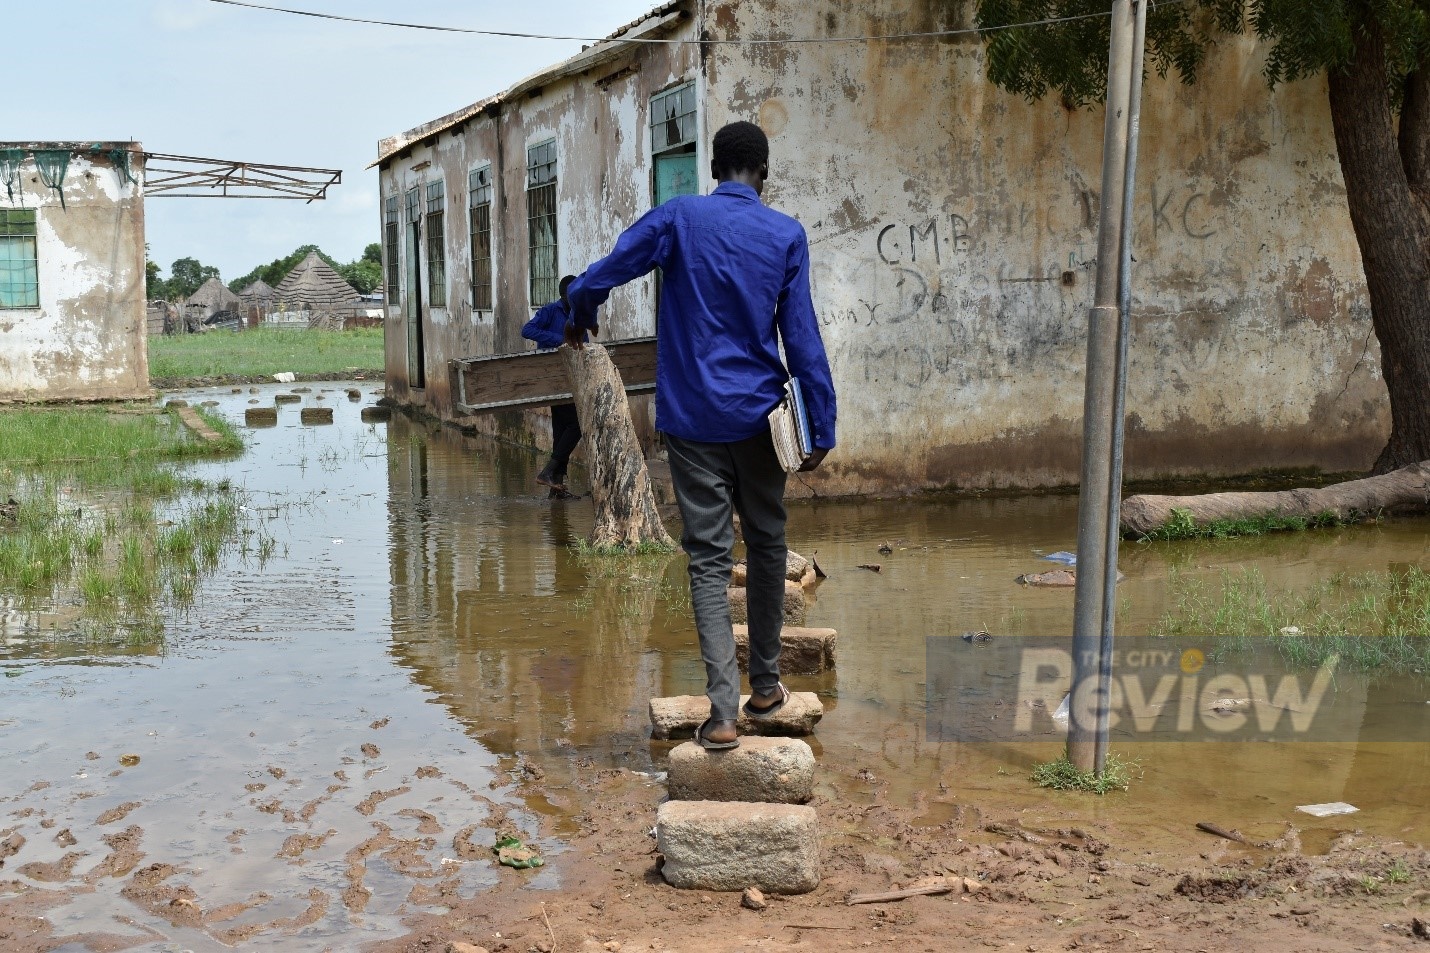 Learners rendered hopeless as floods submerge schools in Unity state